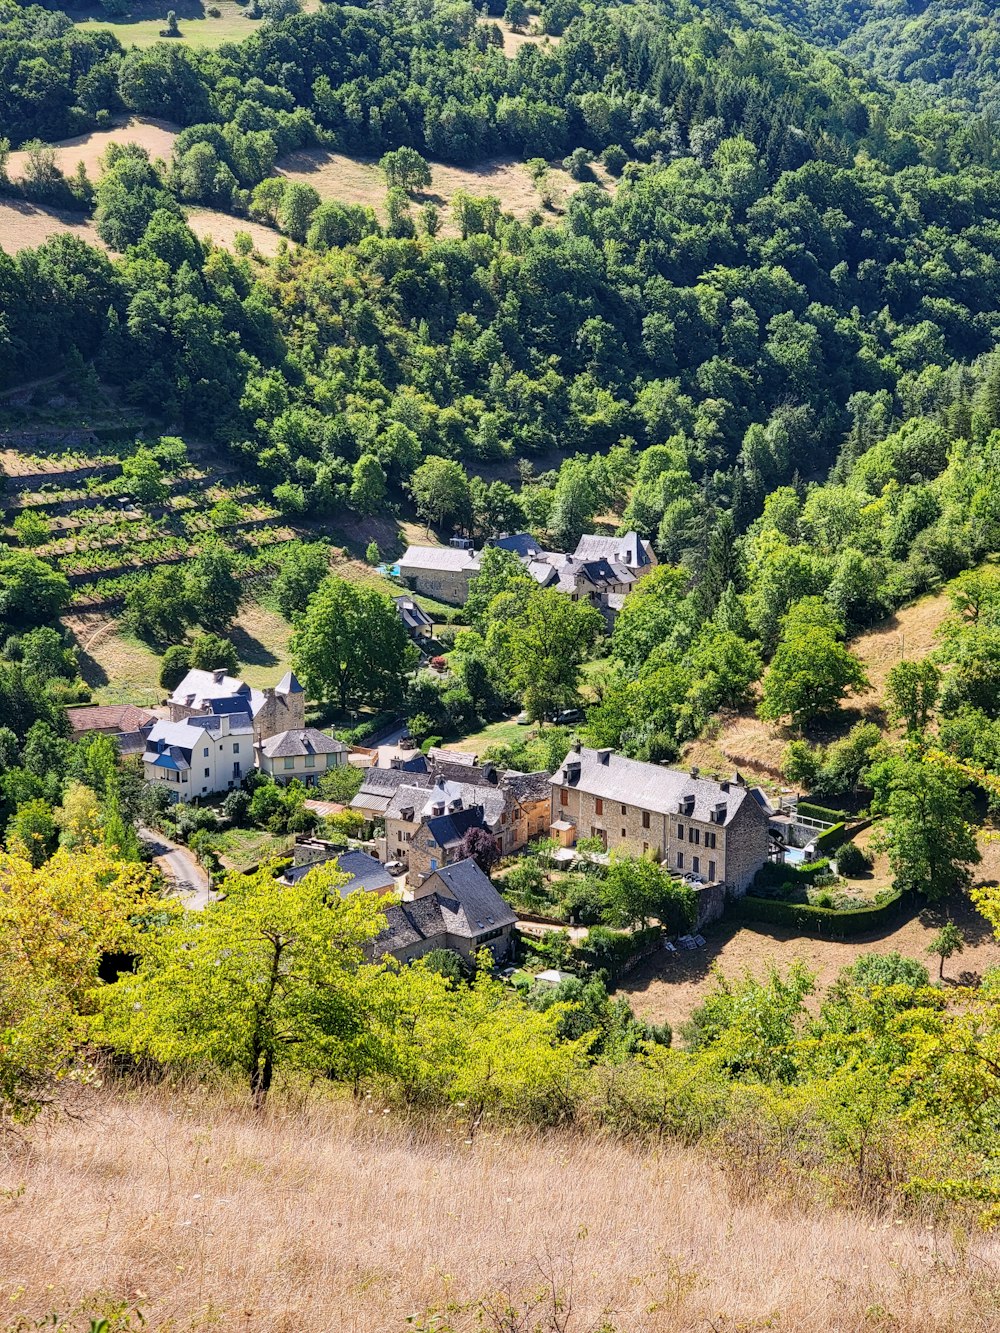 an aerial view of a house in the middle of a wooded area